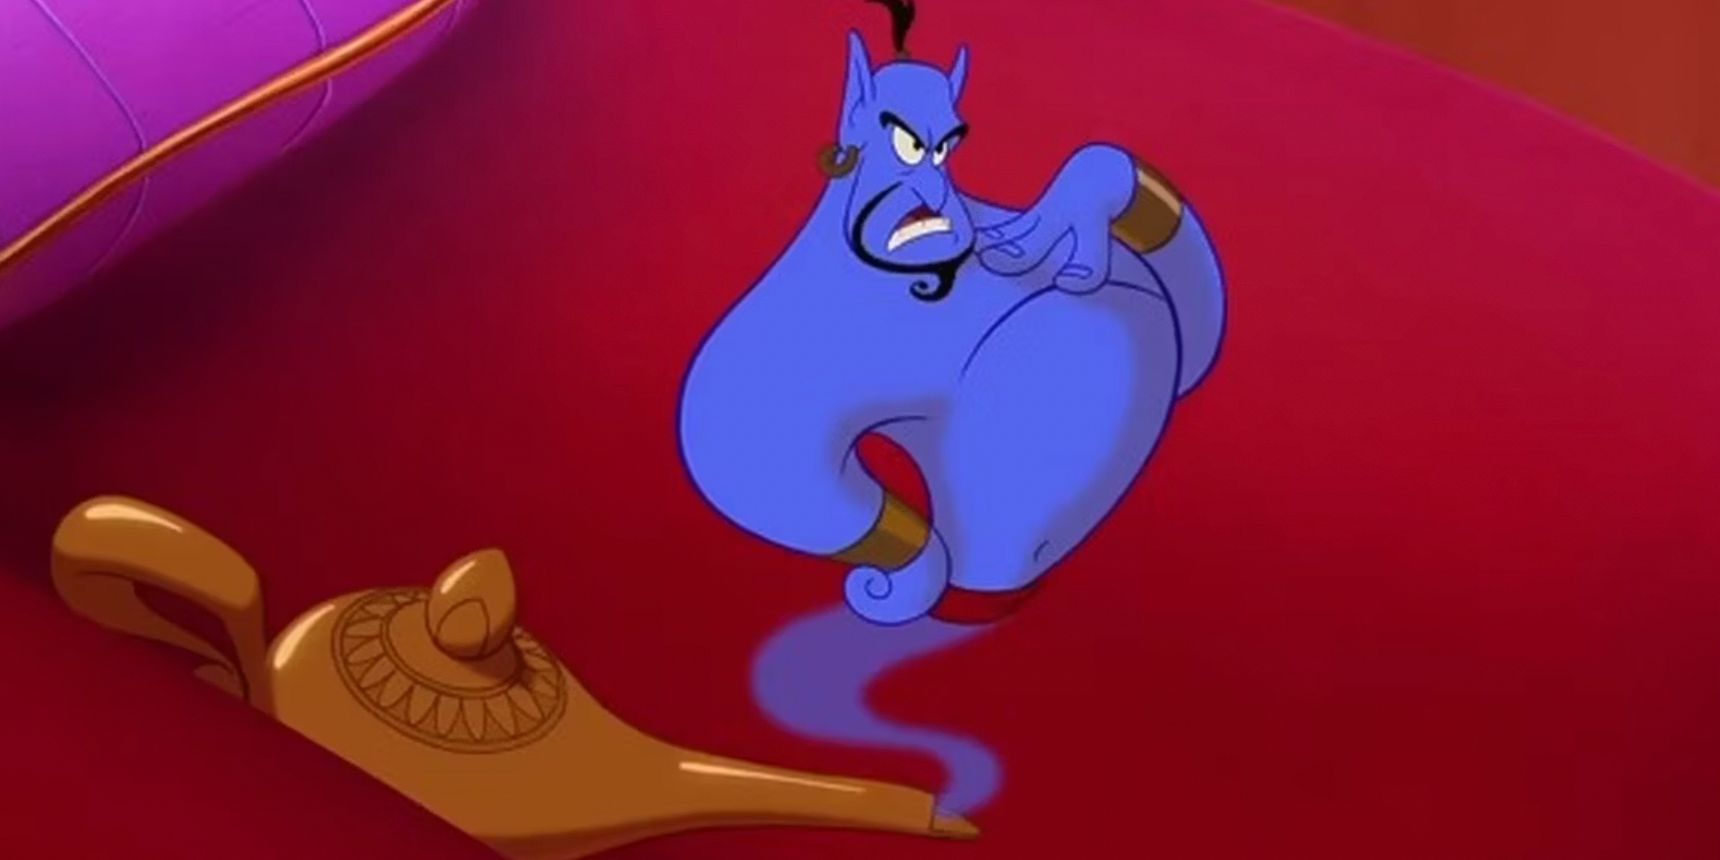 Genie is angry coming out of his lamp in the animated Aladdin